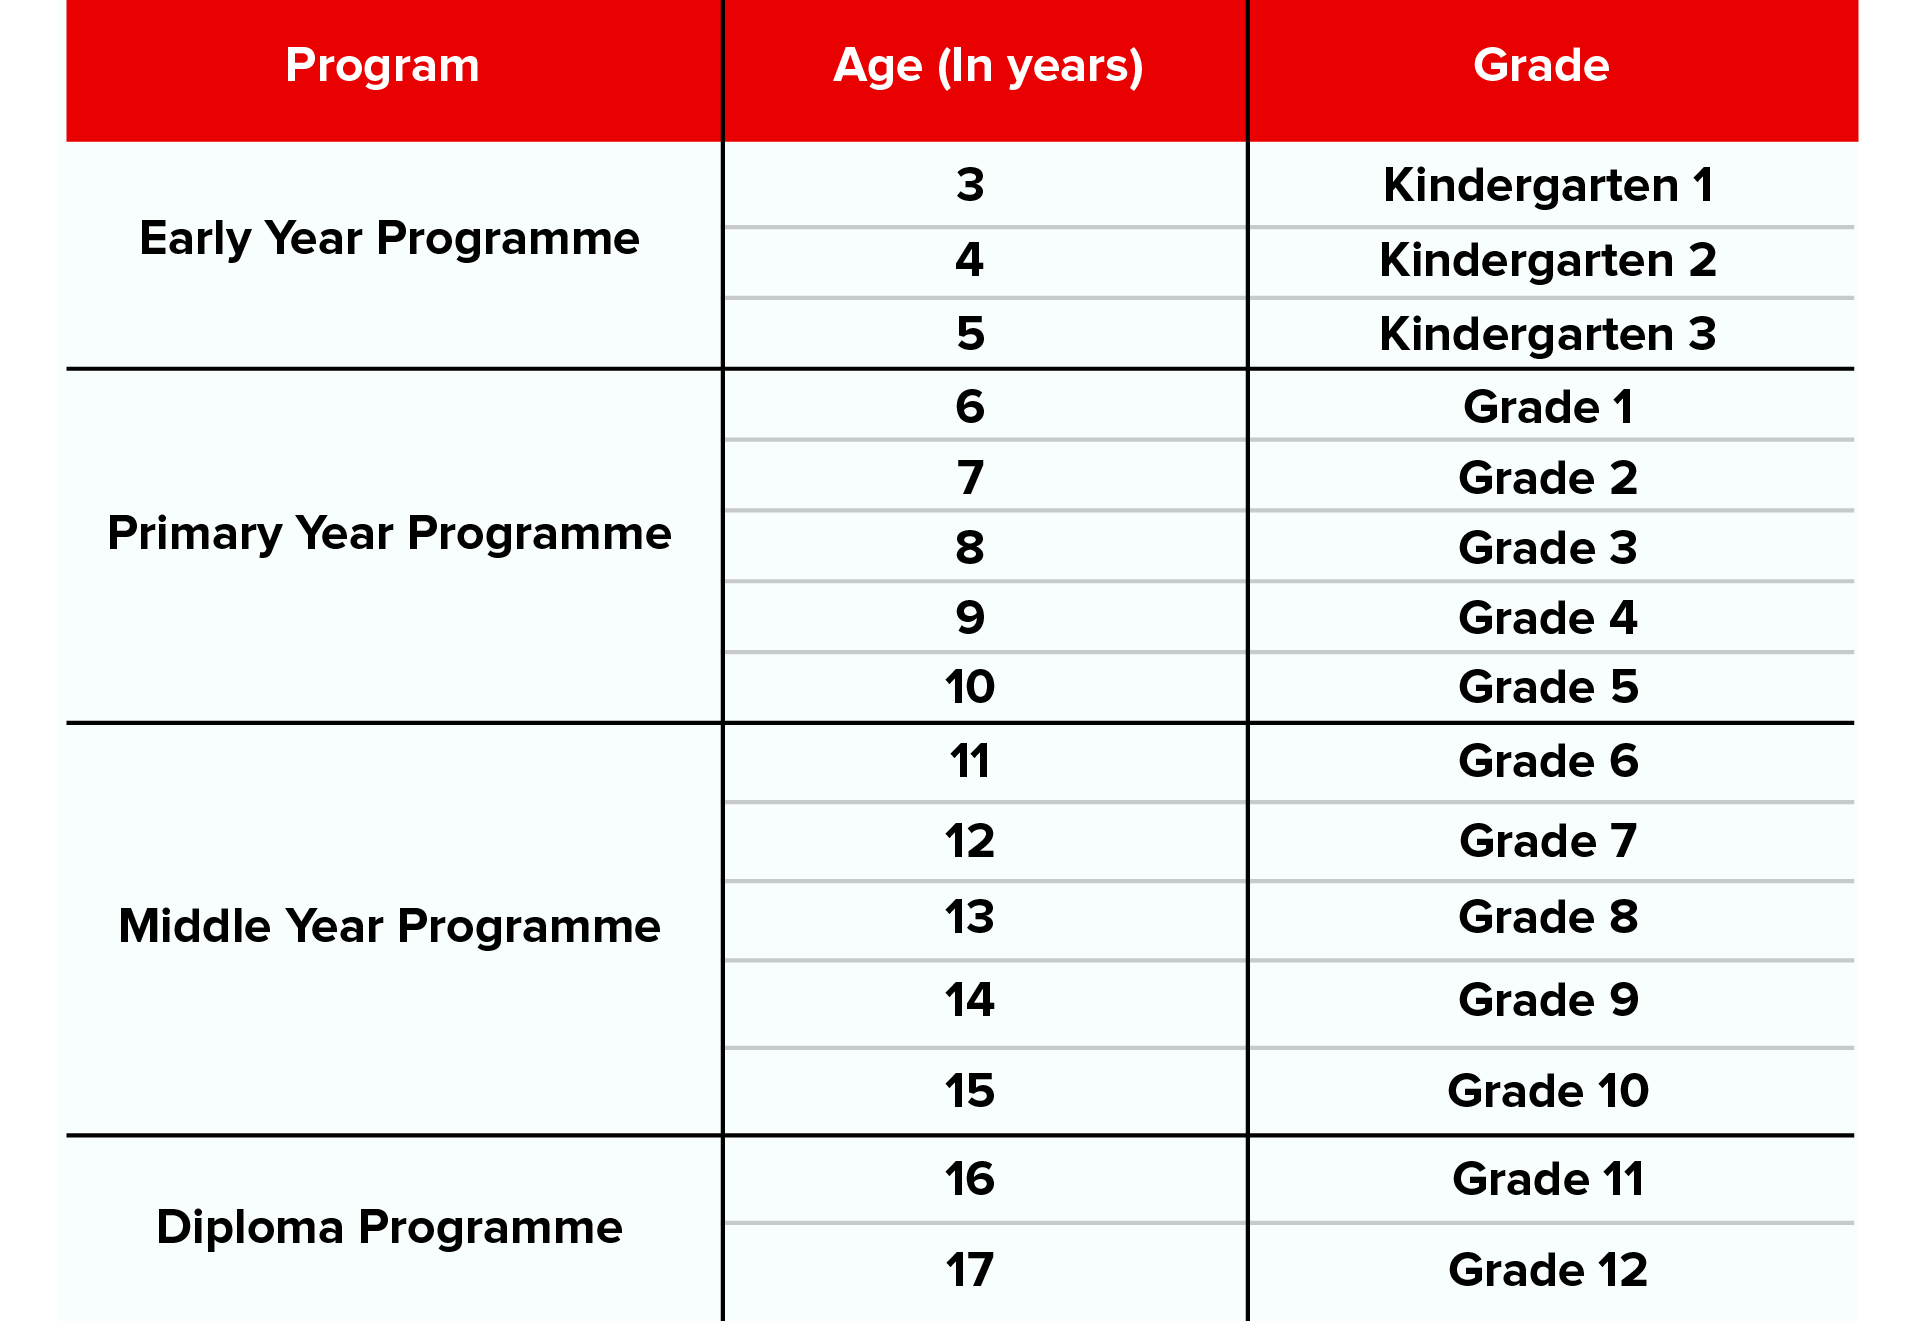 Age Criteria Table for Admission